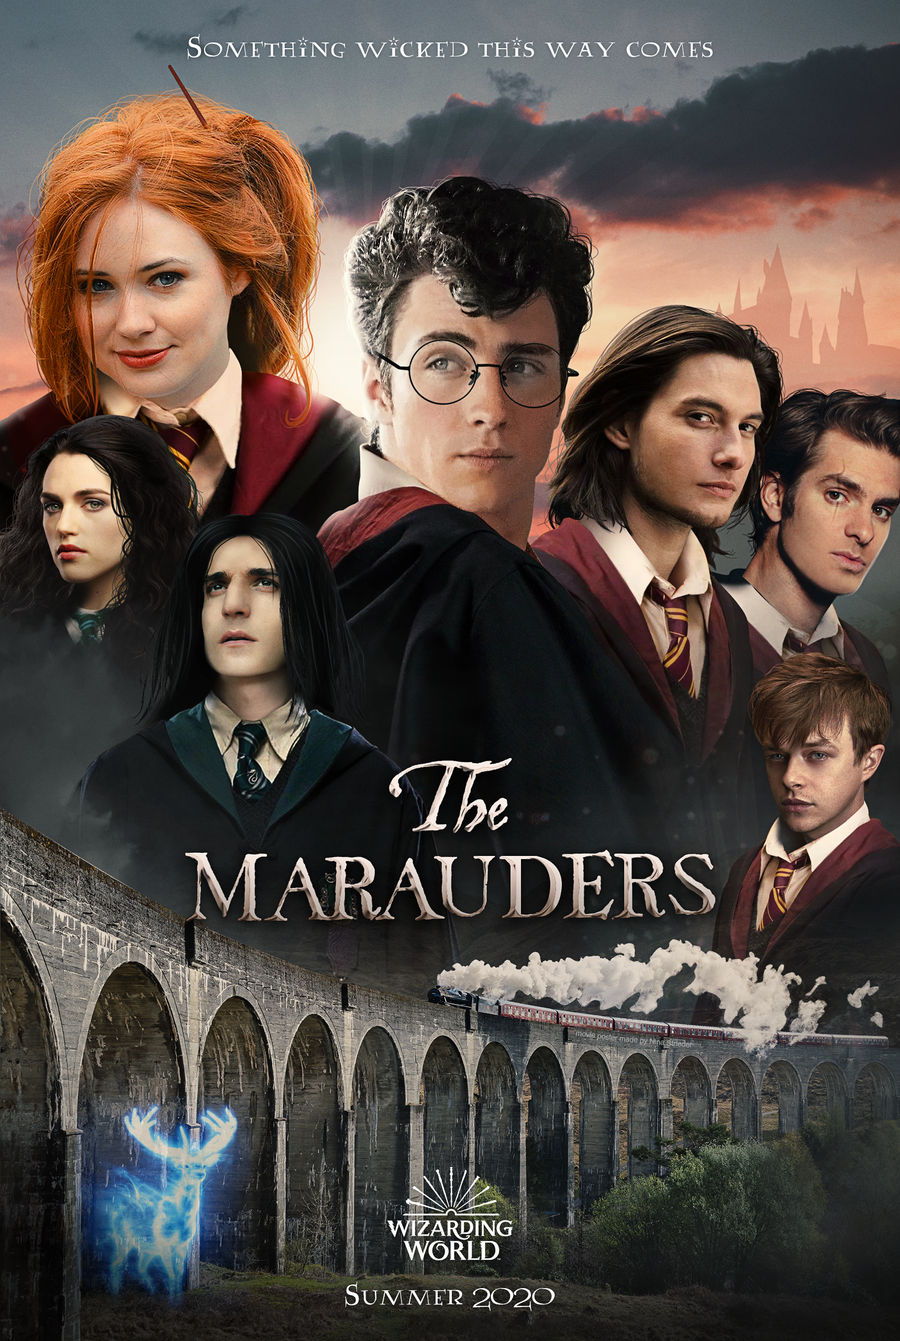 The Marauders   Fanmade Poster By Ninastrieder Ddc9d6b Fullview 